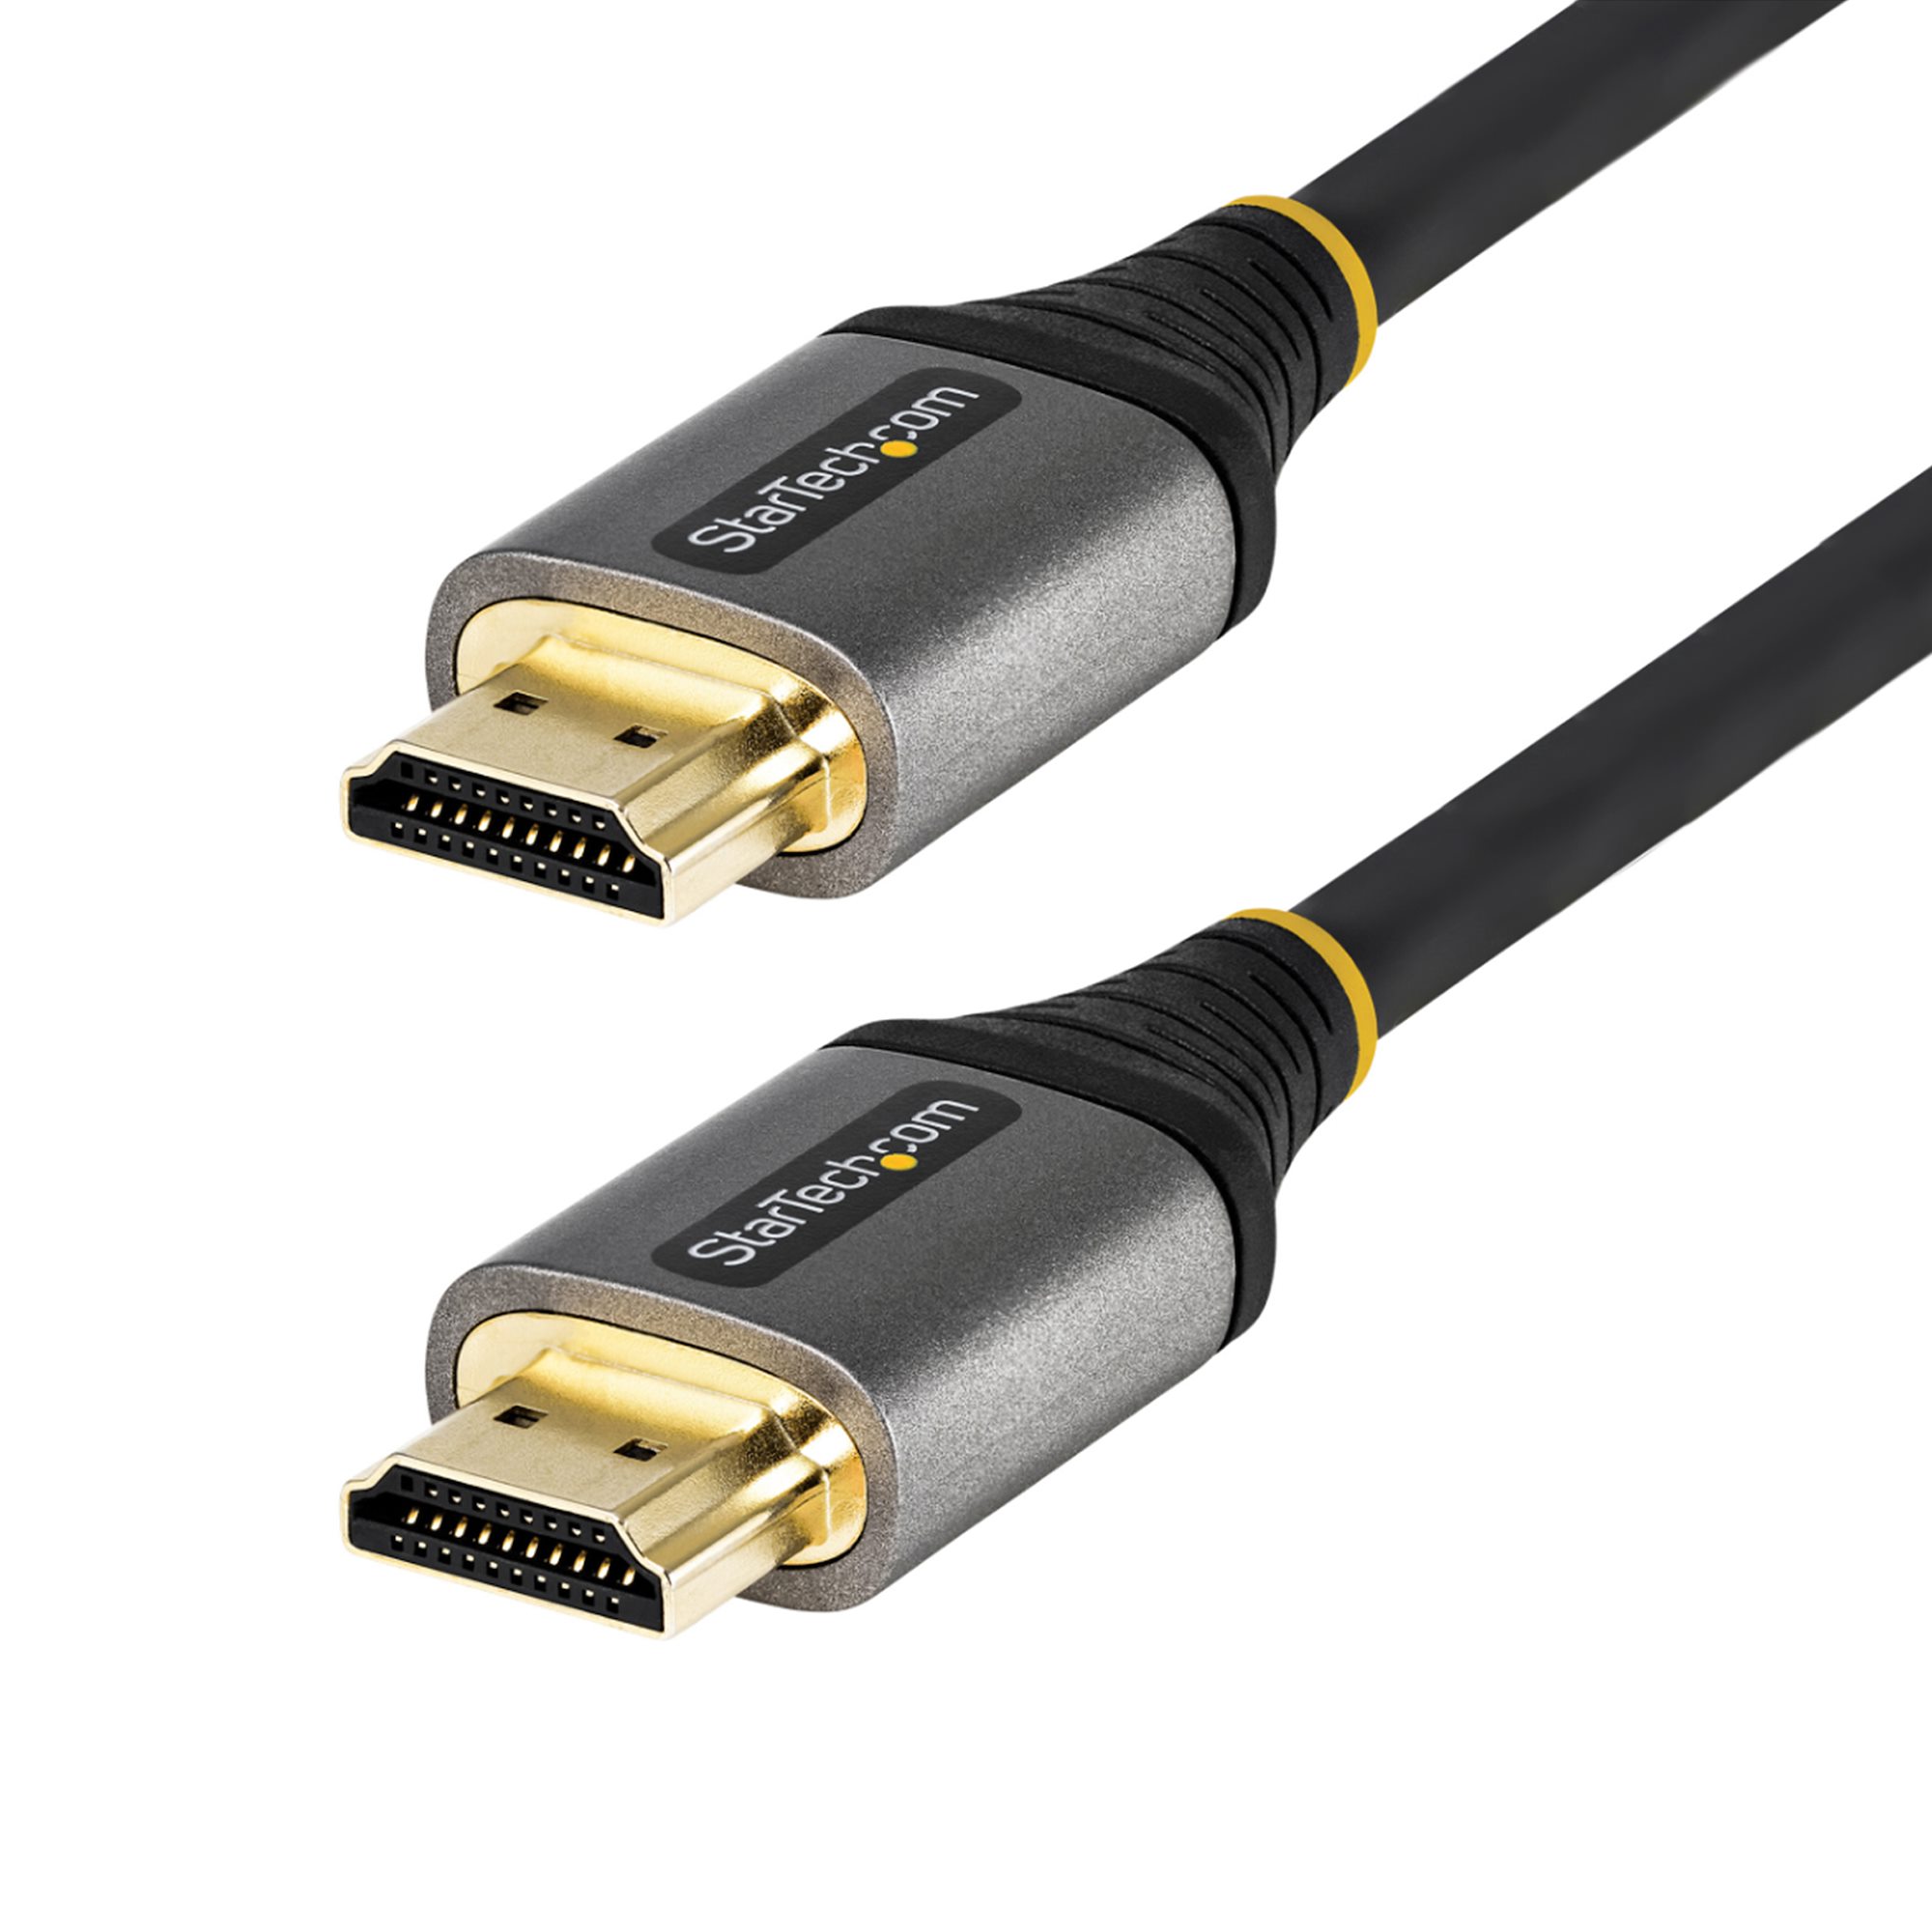 PRO Certified Ultra High Speed HDMI 2.1 Cable 8K 60/4K 120Hz 48Gbps Plugs 2m